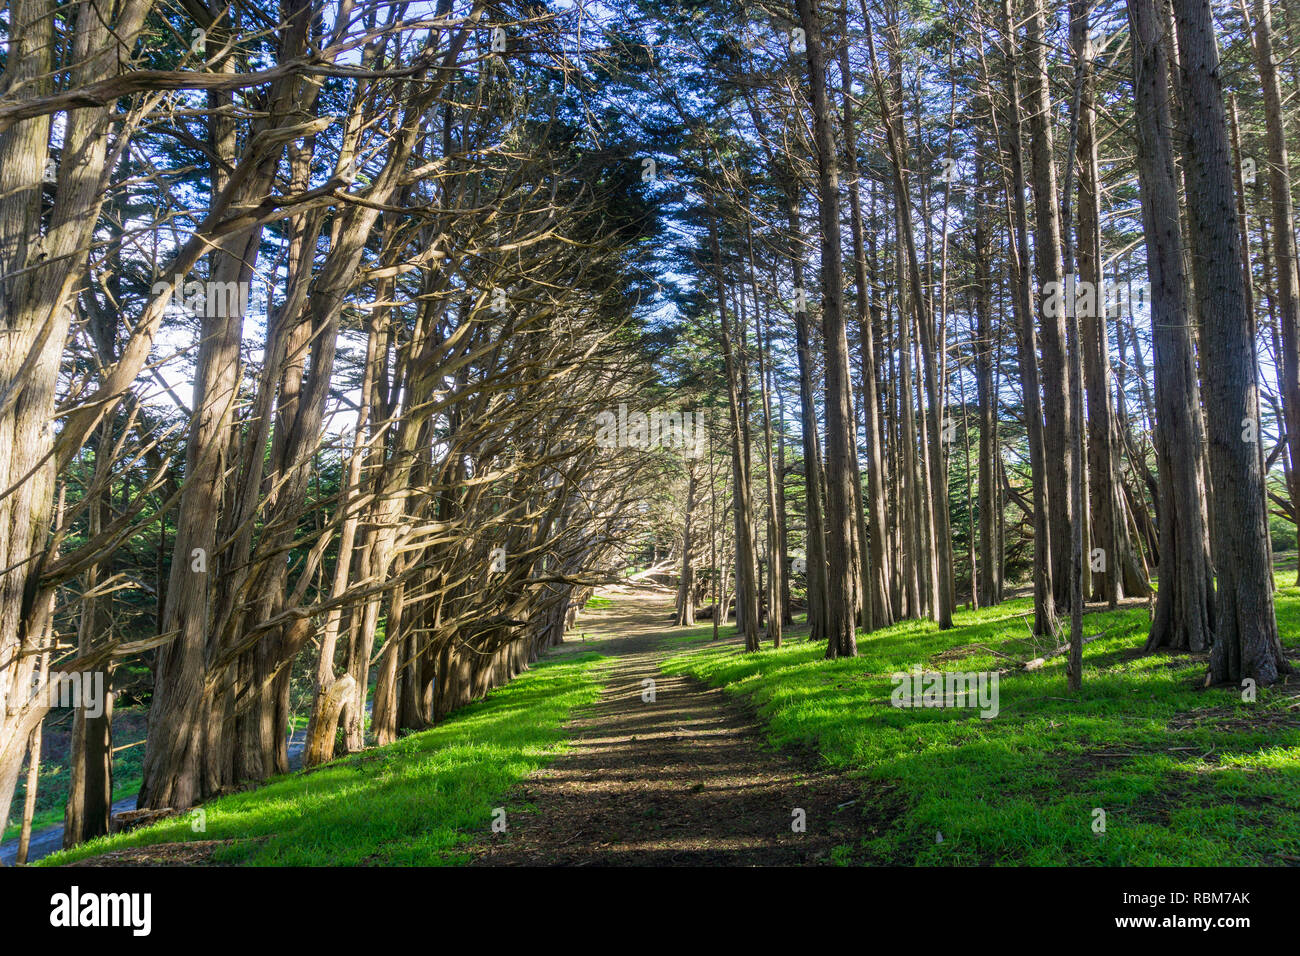 Trail in a Cypress trees forest, Fitzgerald Marine Reserve, Moss Beach, California Stock Photo